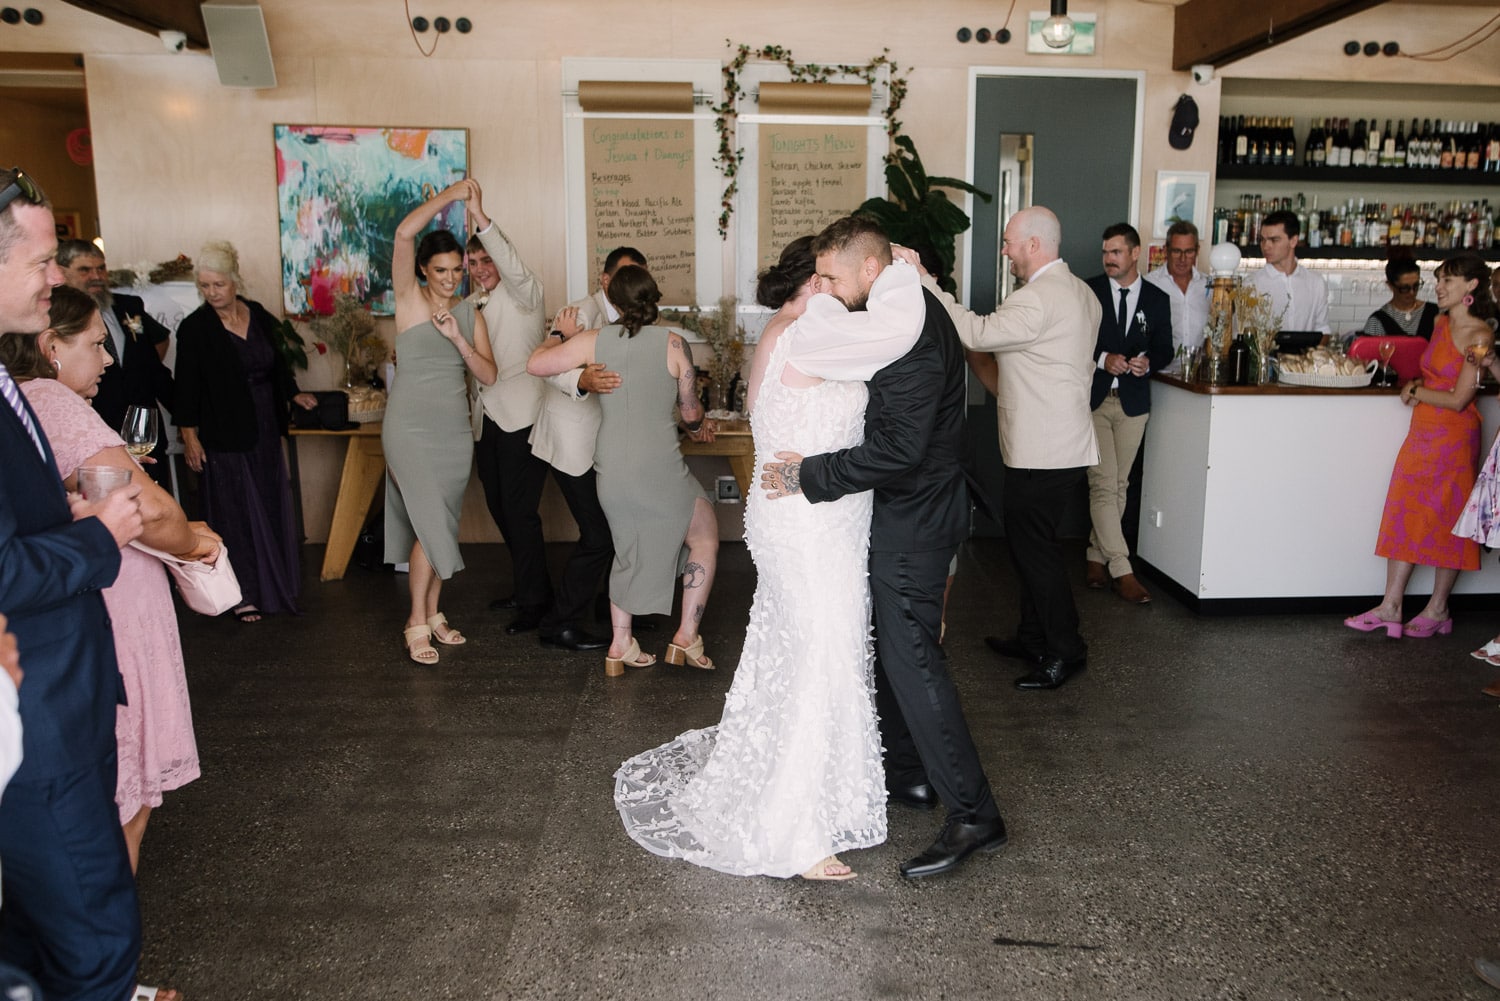 Bride and Groom dance at wedding reception at the Pavilion Warrnambool